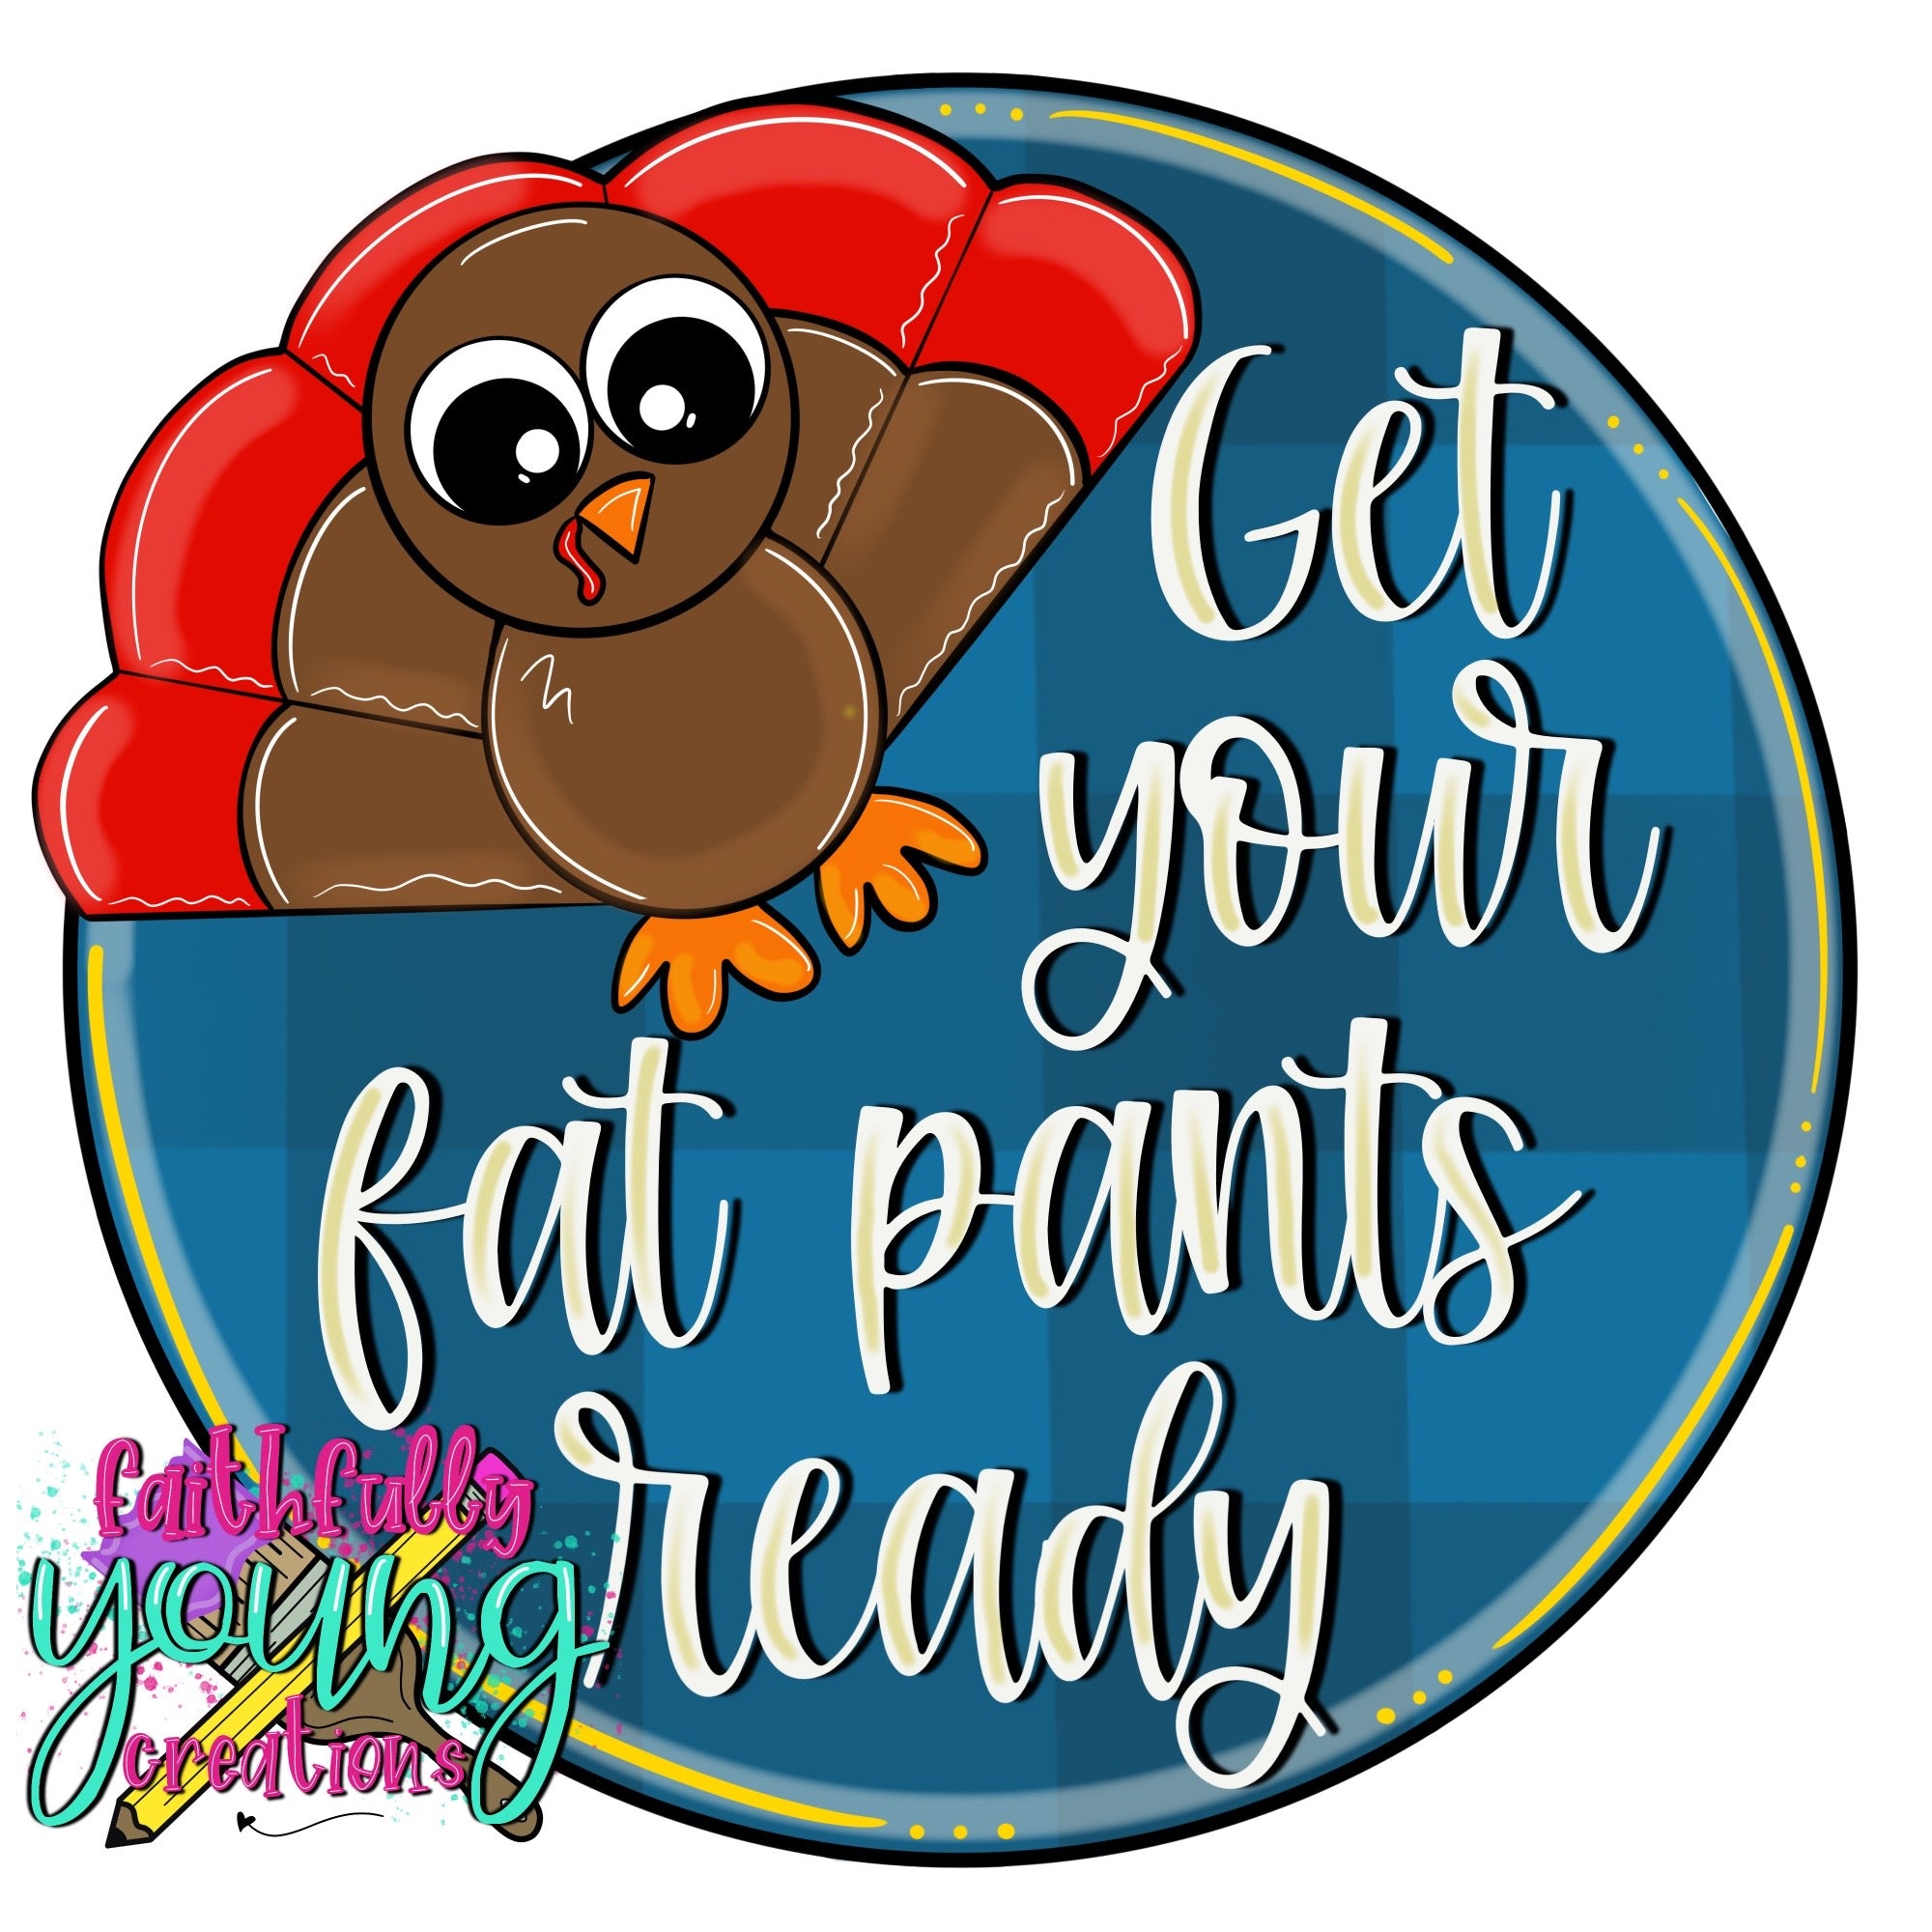 Get Your Fat Pants Ready Template File